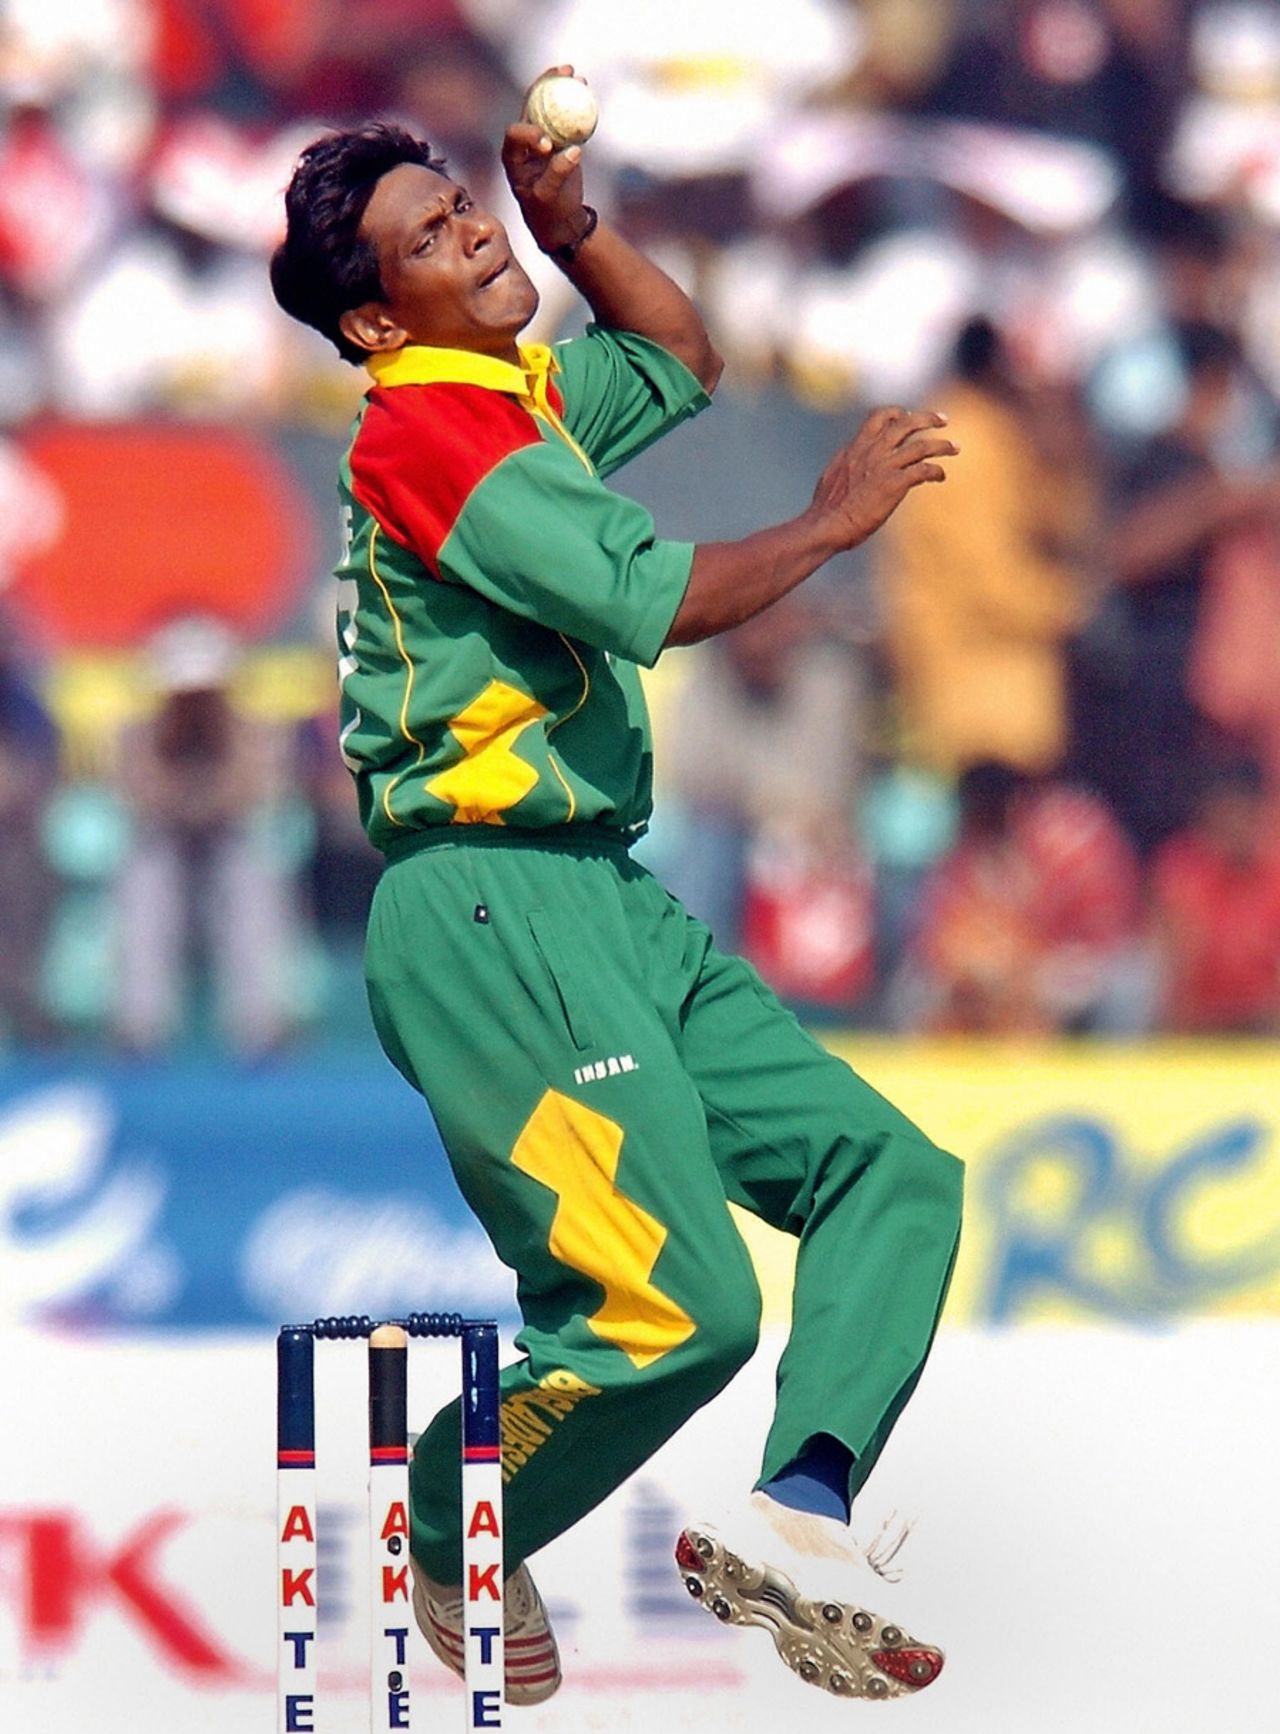 Mohammad Rafique is about to deliver the ball, Only Twenty20 International: Bangladesh v Zimbabwe, Khulna, November 28, 2006